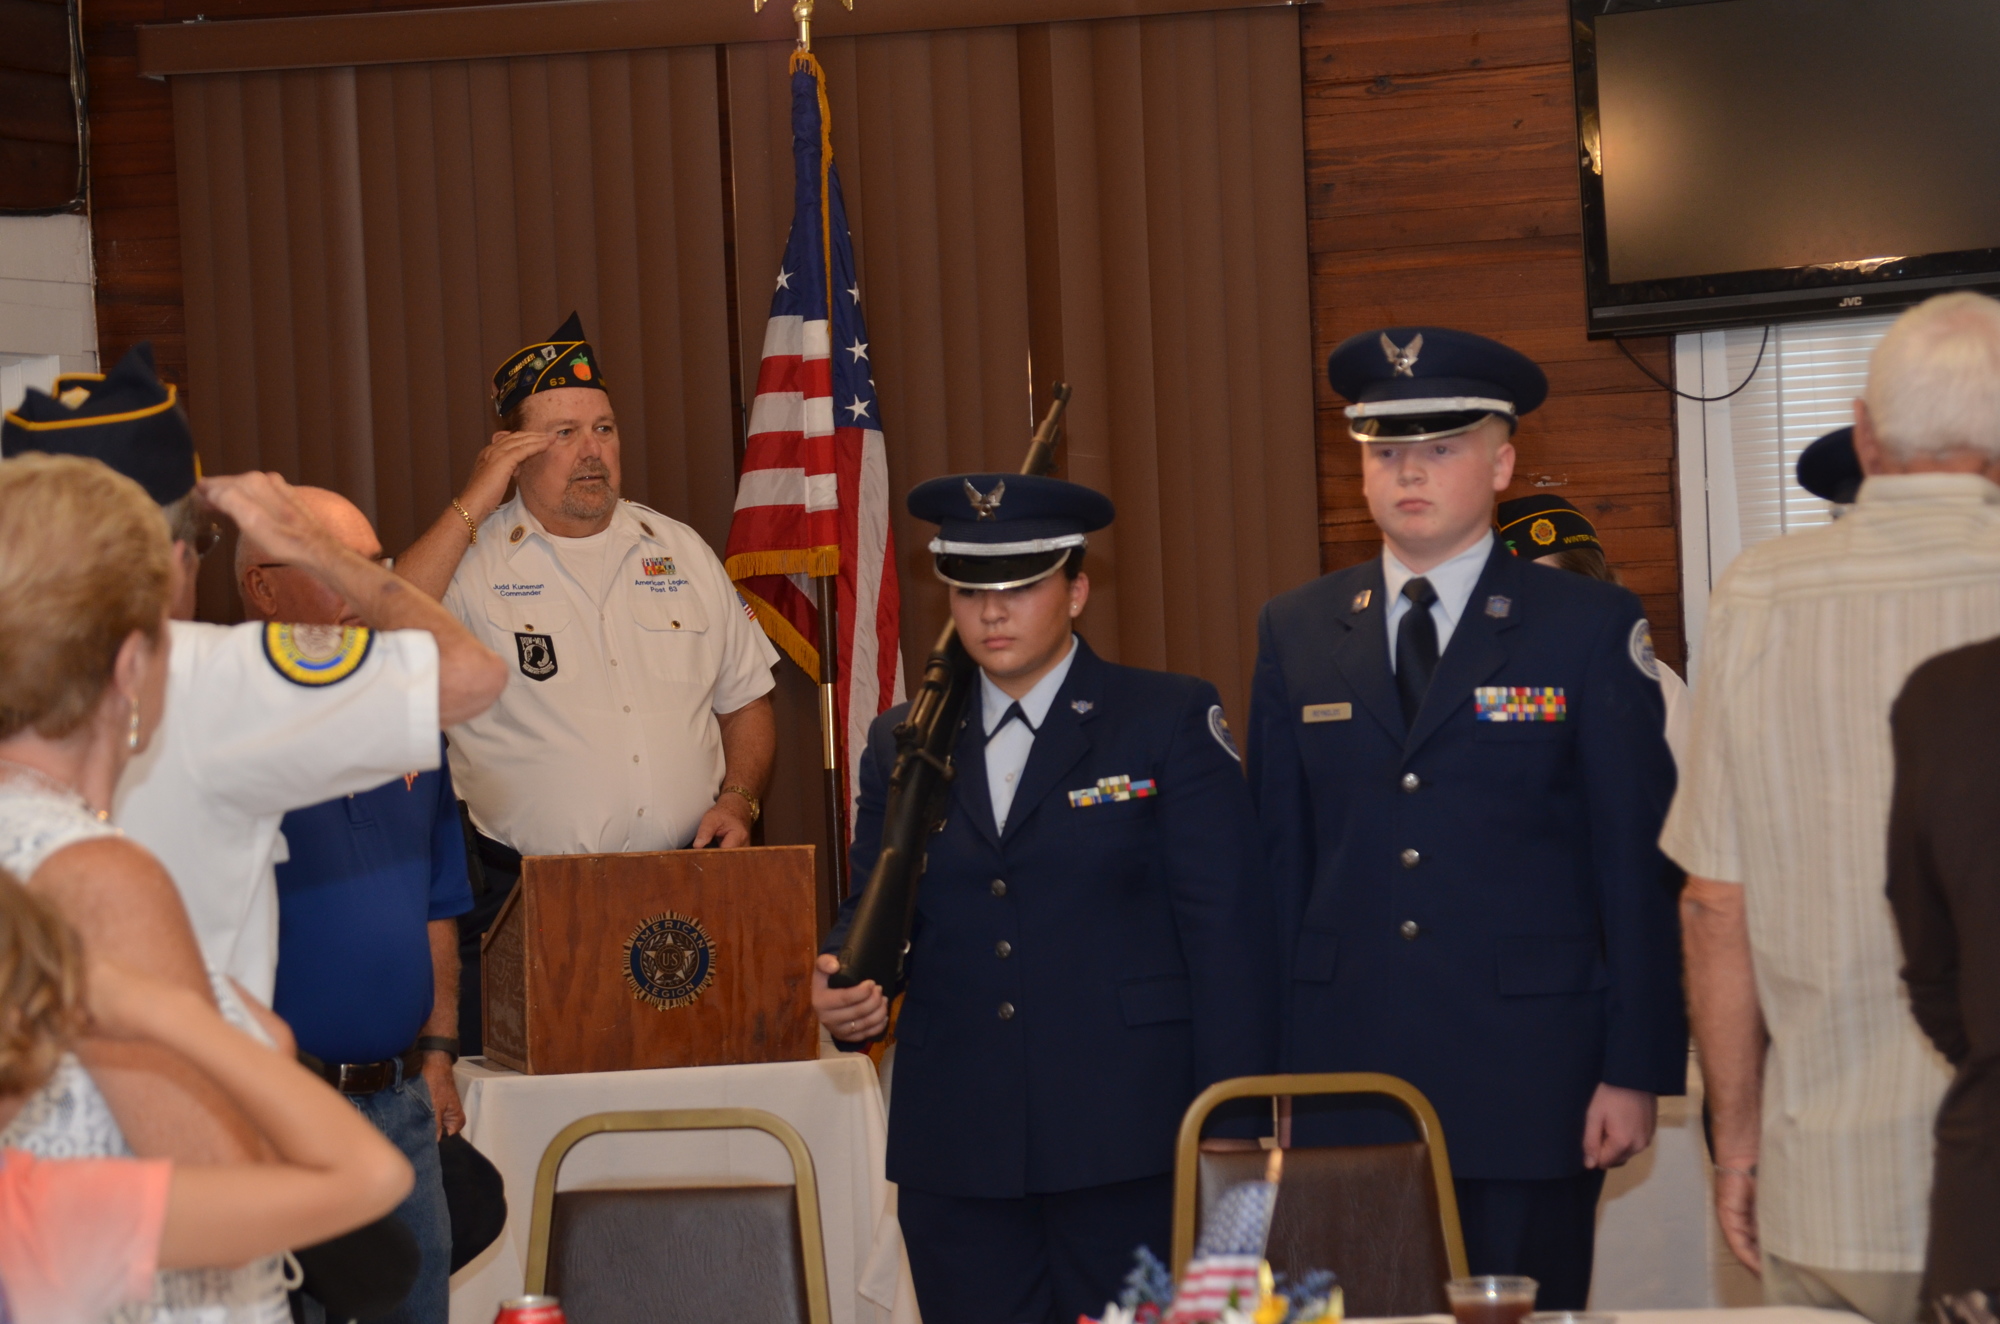 West Orange High School’s JROTC presented the colors at the beginning of the 98th anniversary awards dinner.